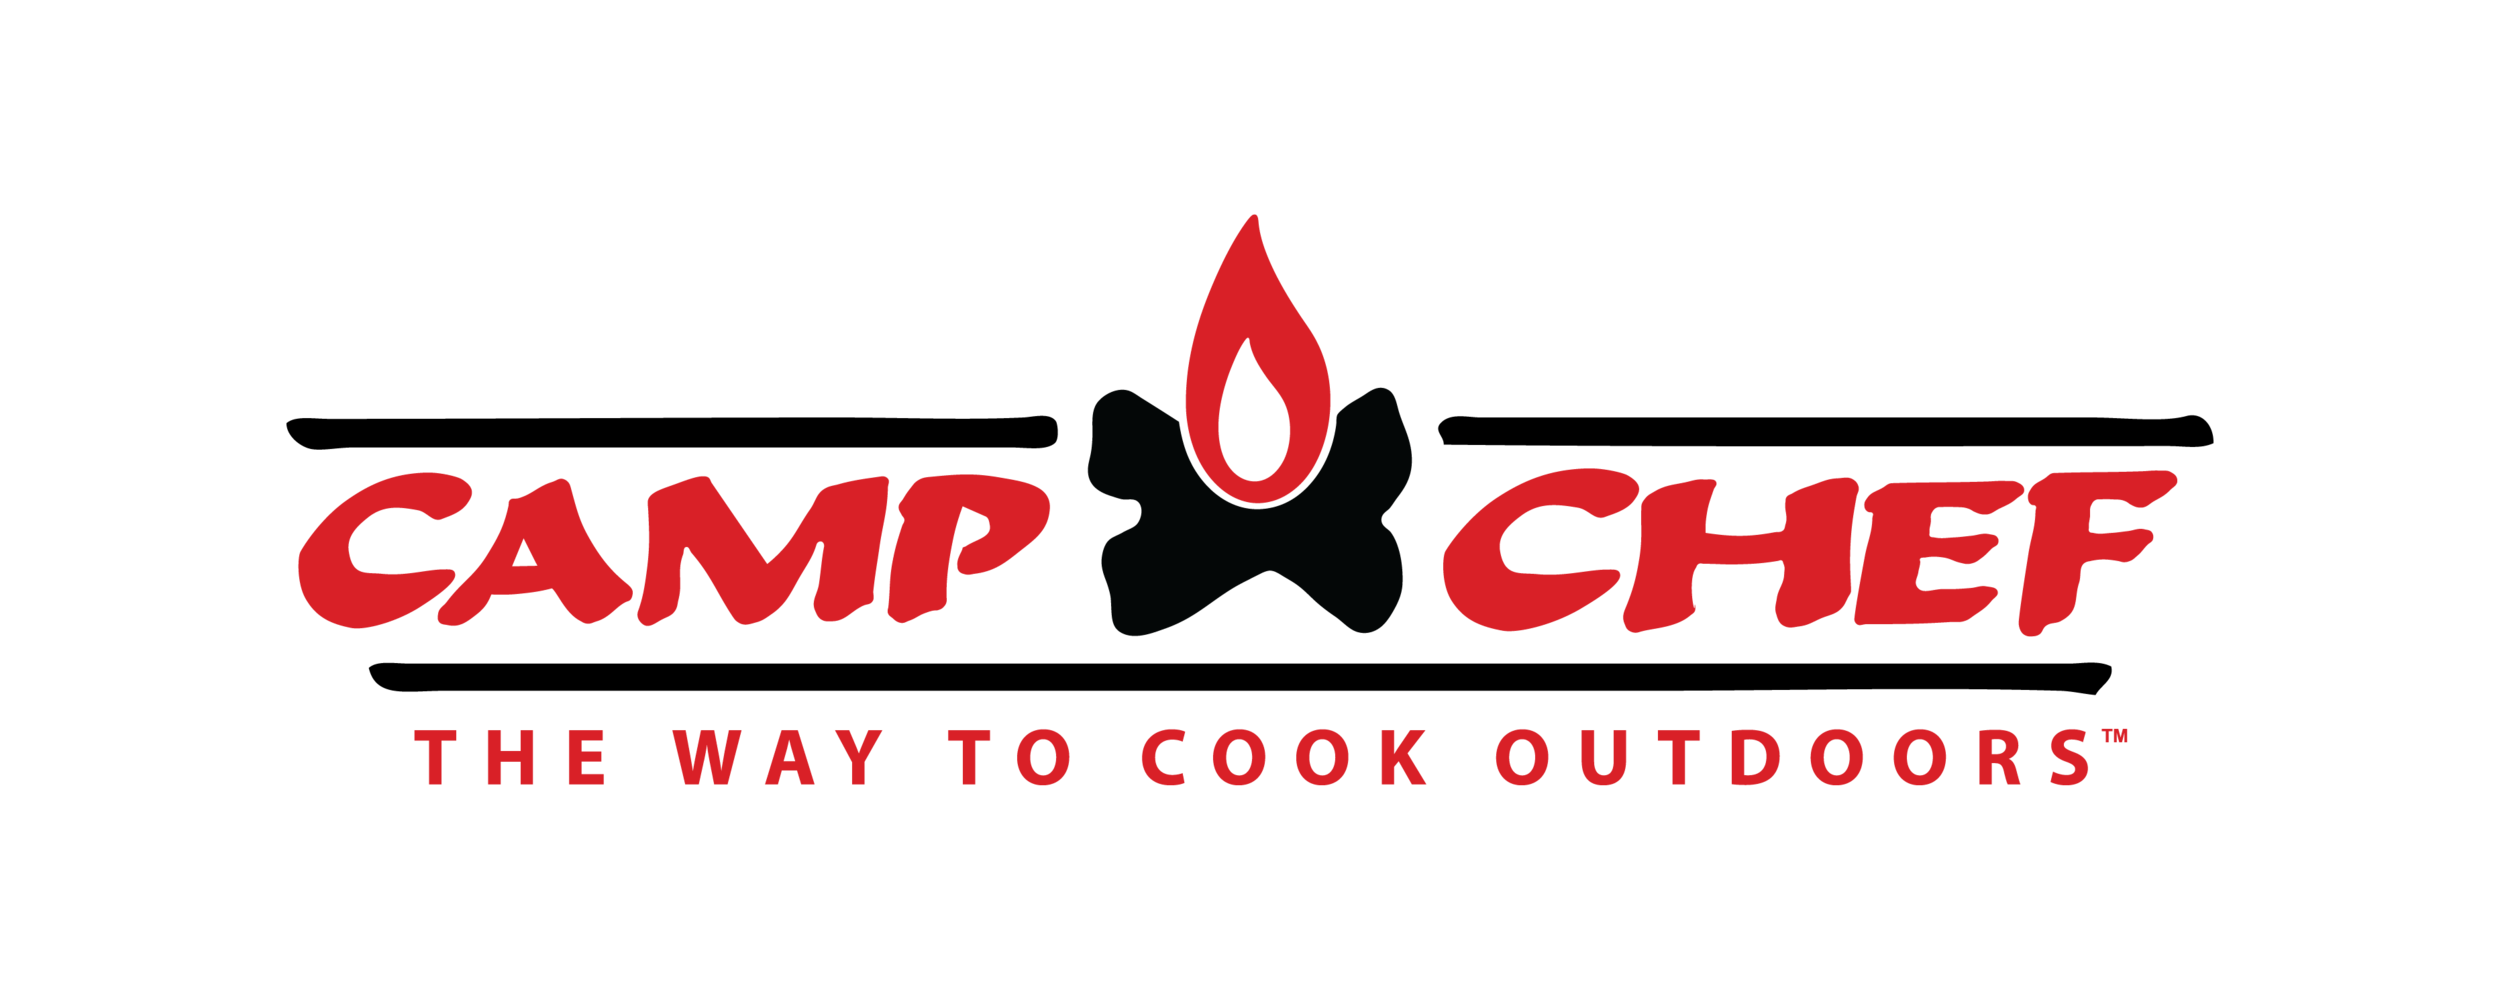 Camp Chef-01.png